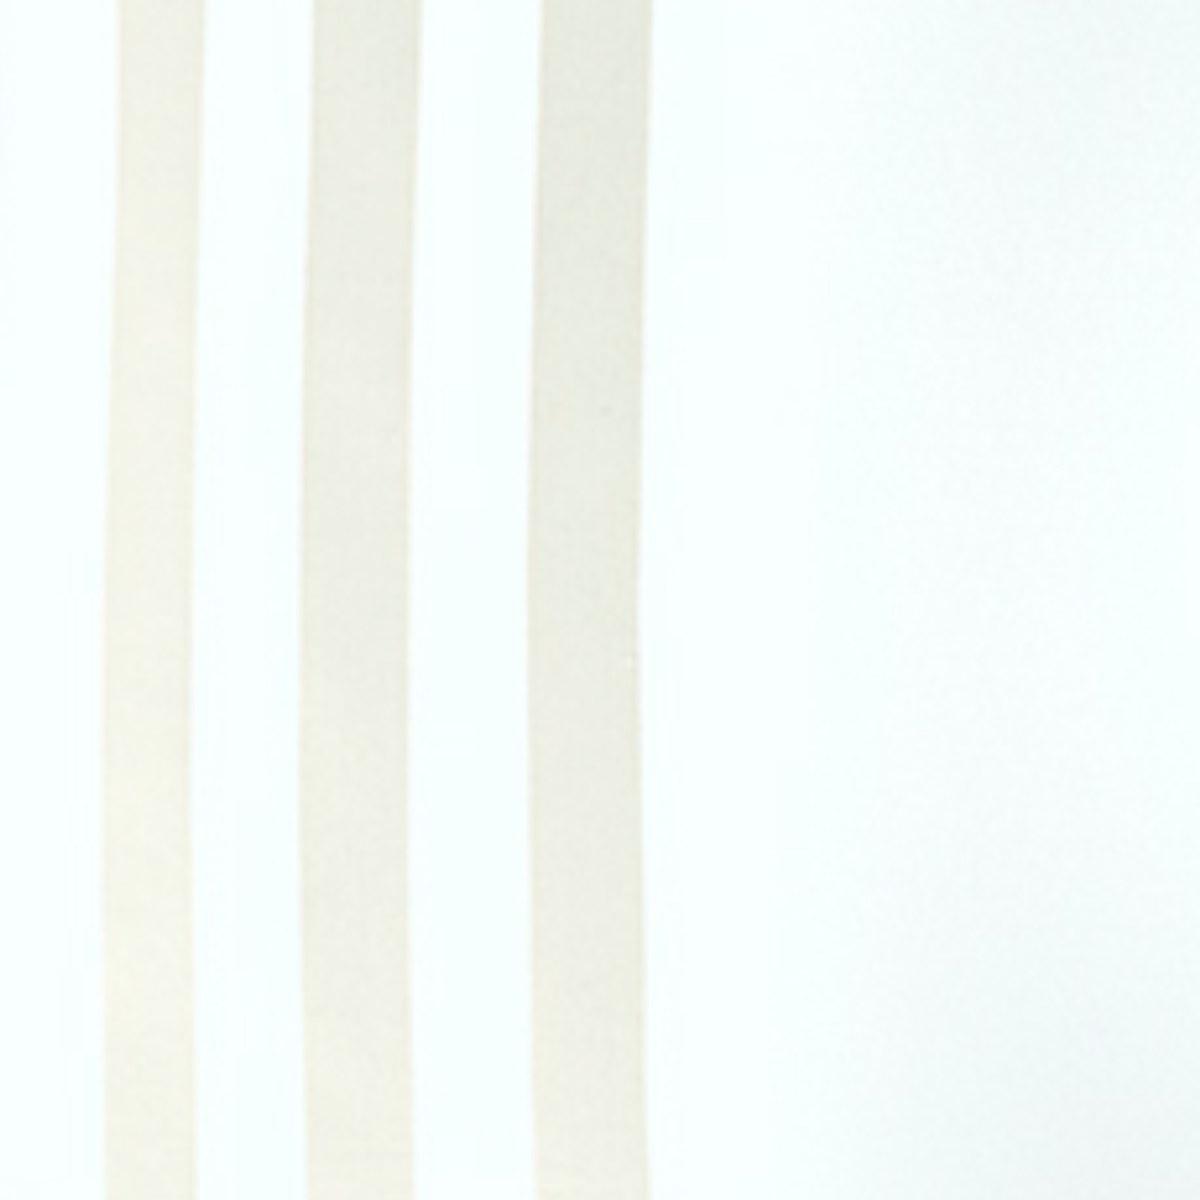 Swatch Sample of Downtown Company Sarah Collection in Ivory  Color